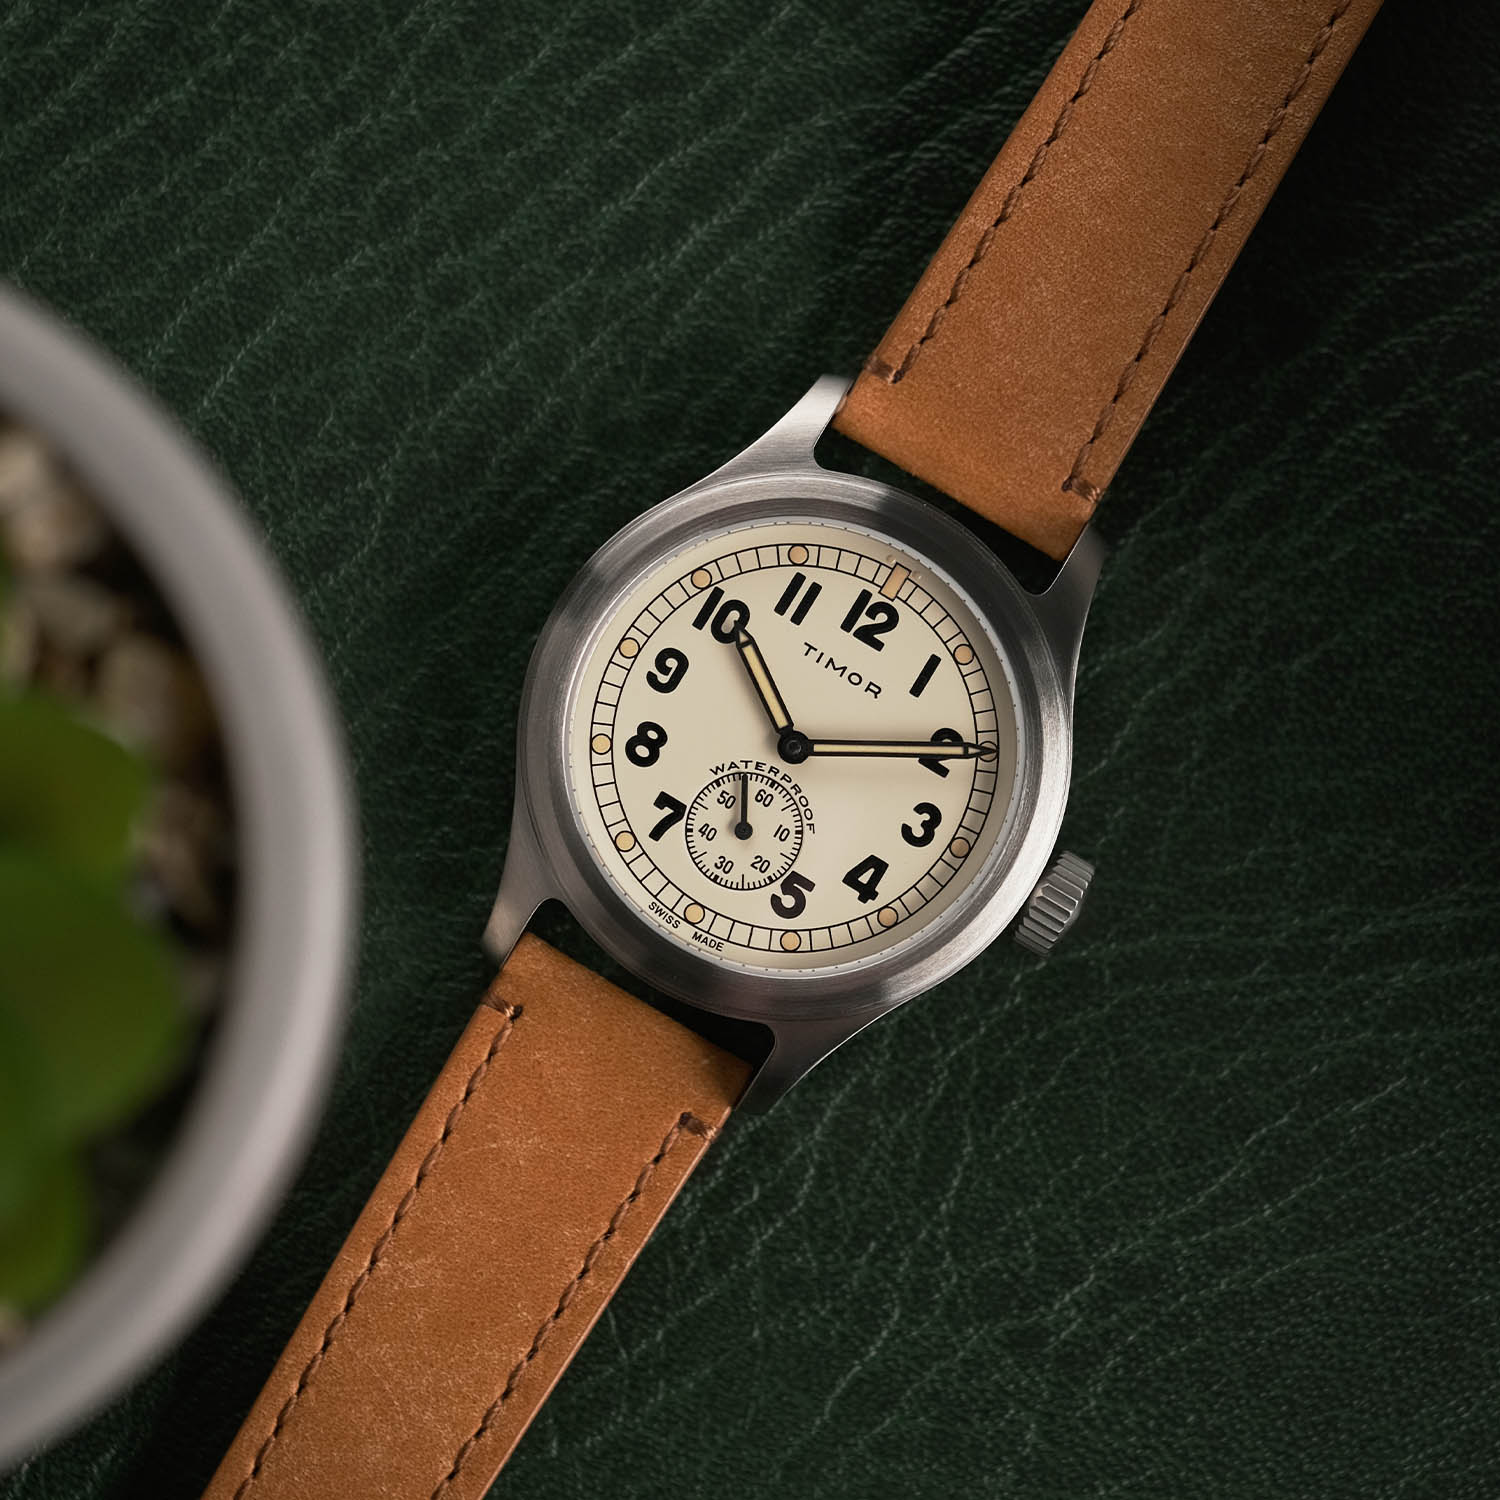 Timor Heritage Field ATP army trade pattern watch reedition